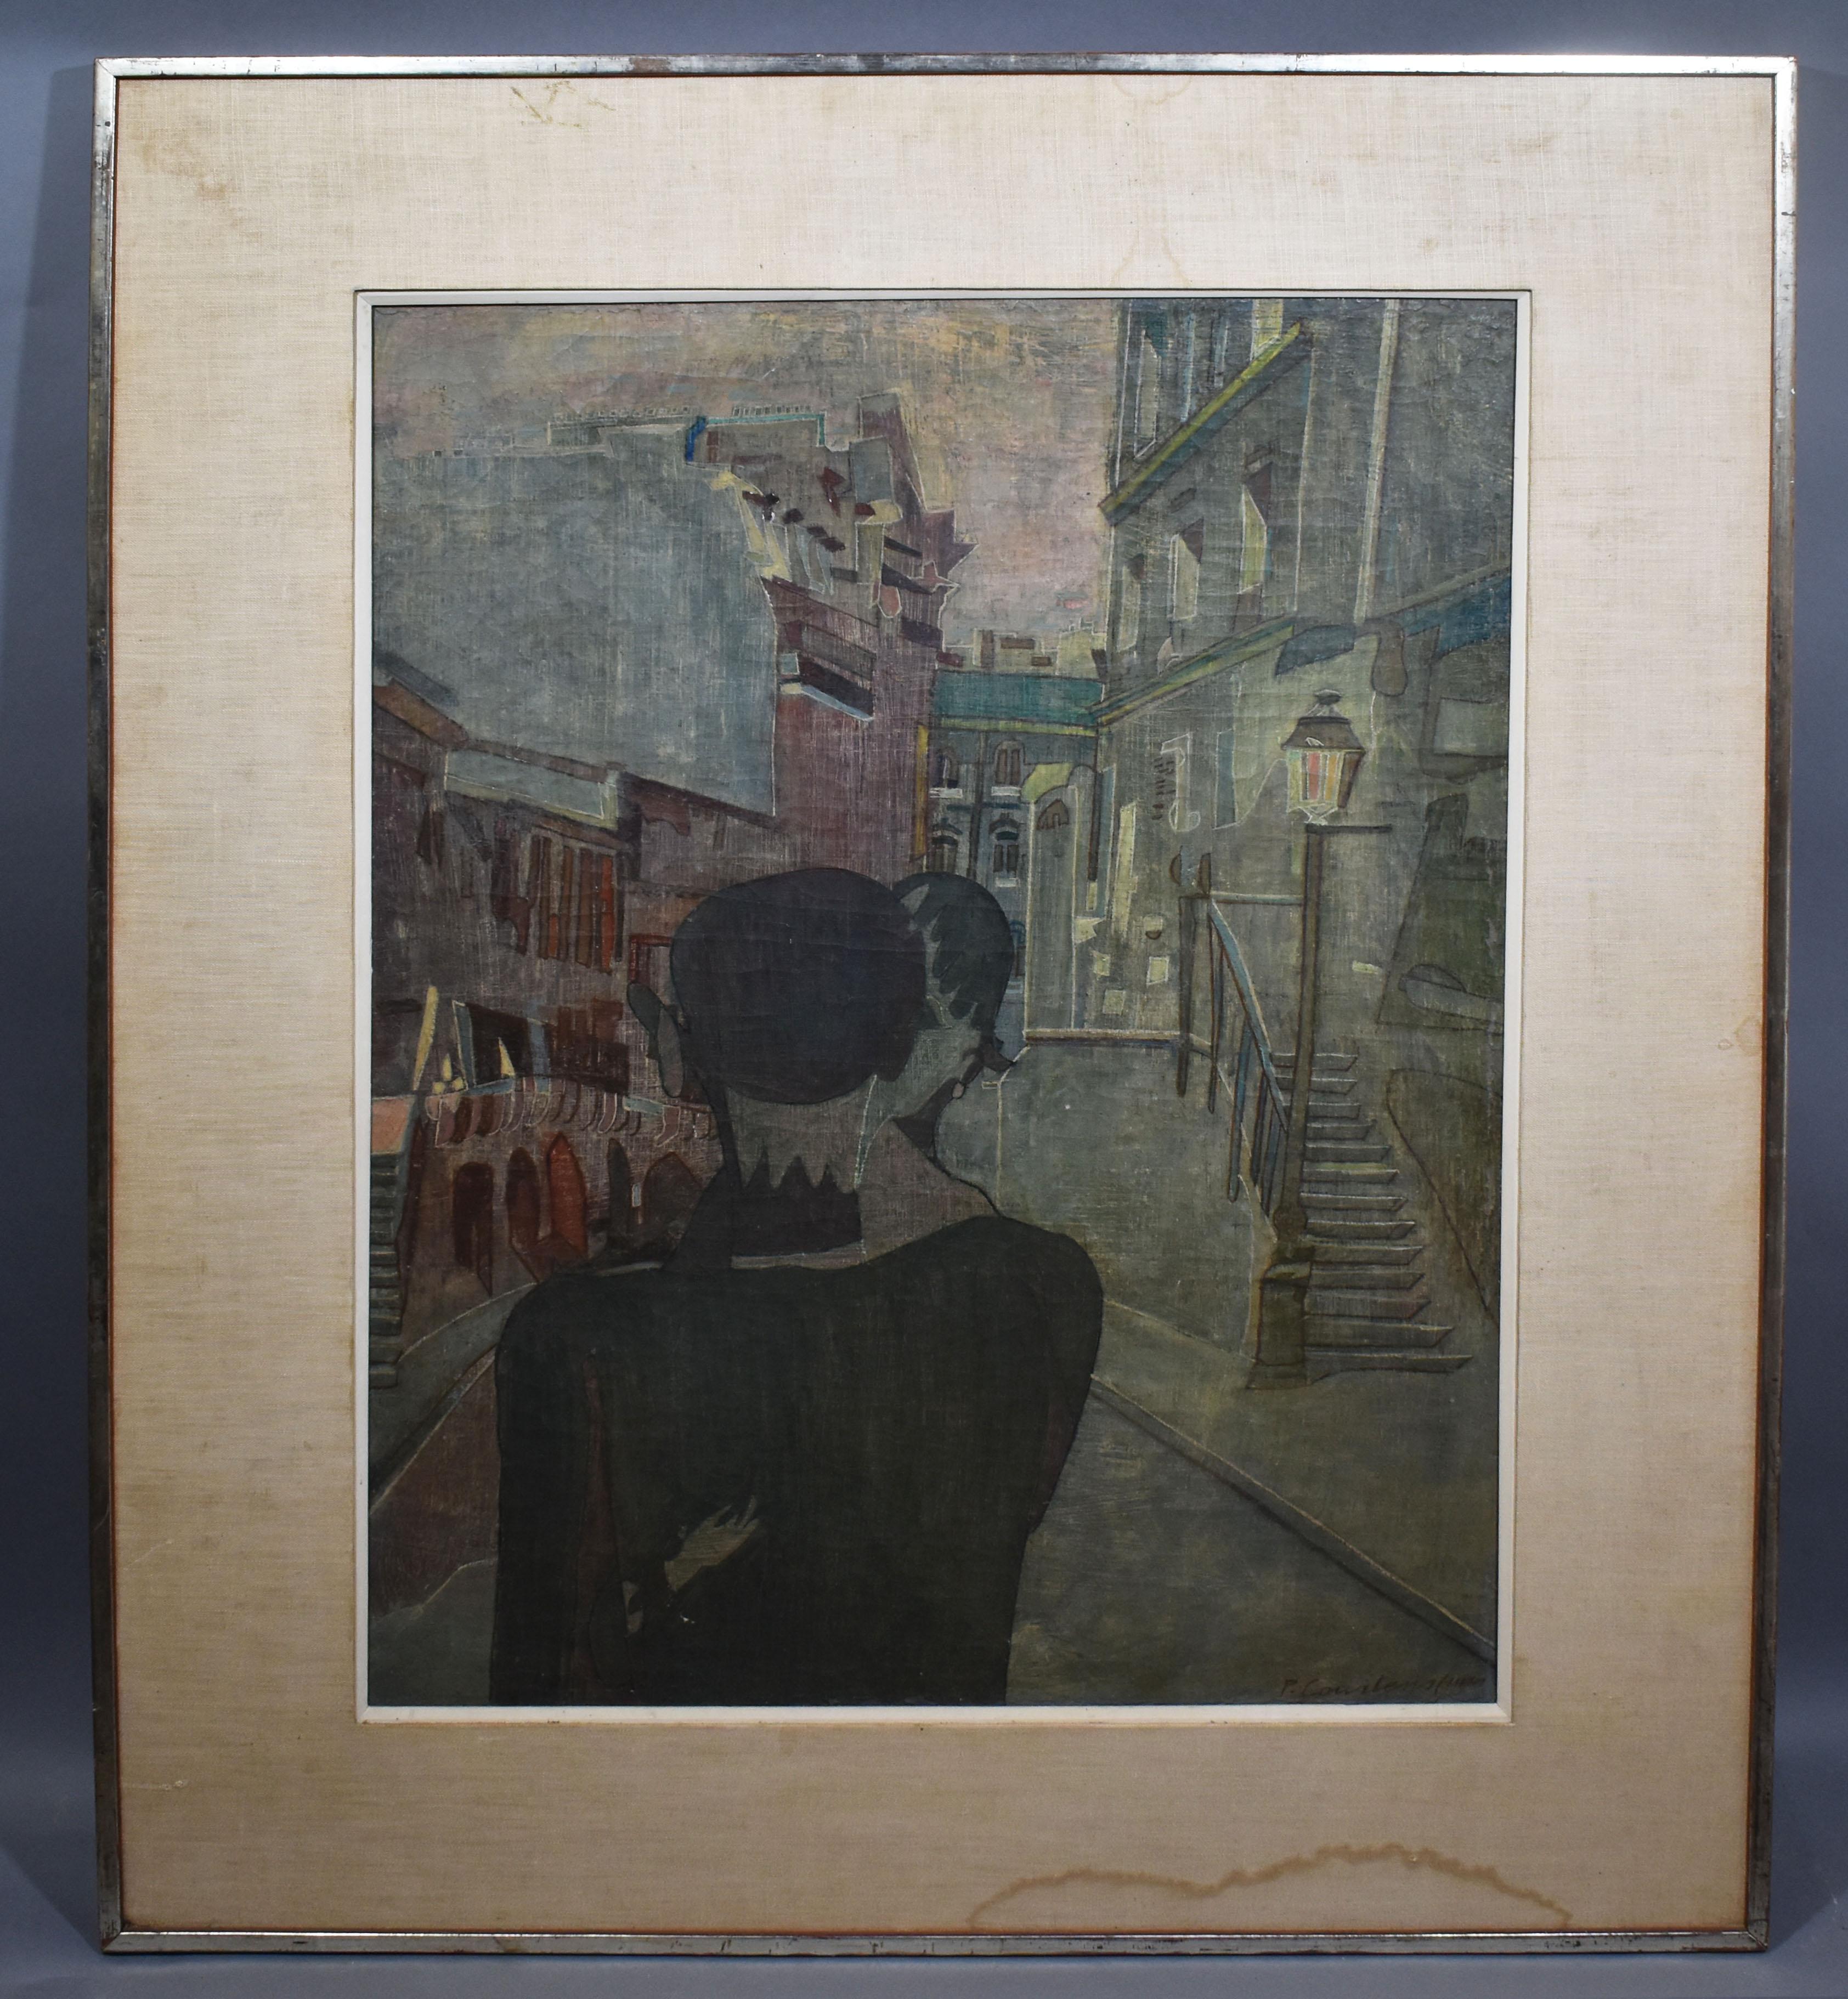 Antique Modernist Belgian Street Scene with Figures Large Original Oil Painting - Gray Landscape Painting by Pierre (Baron) Courtens 